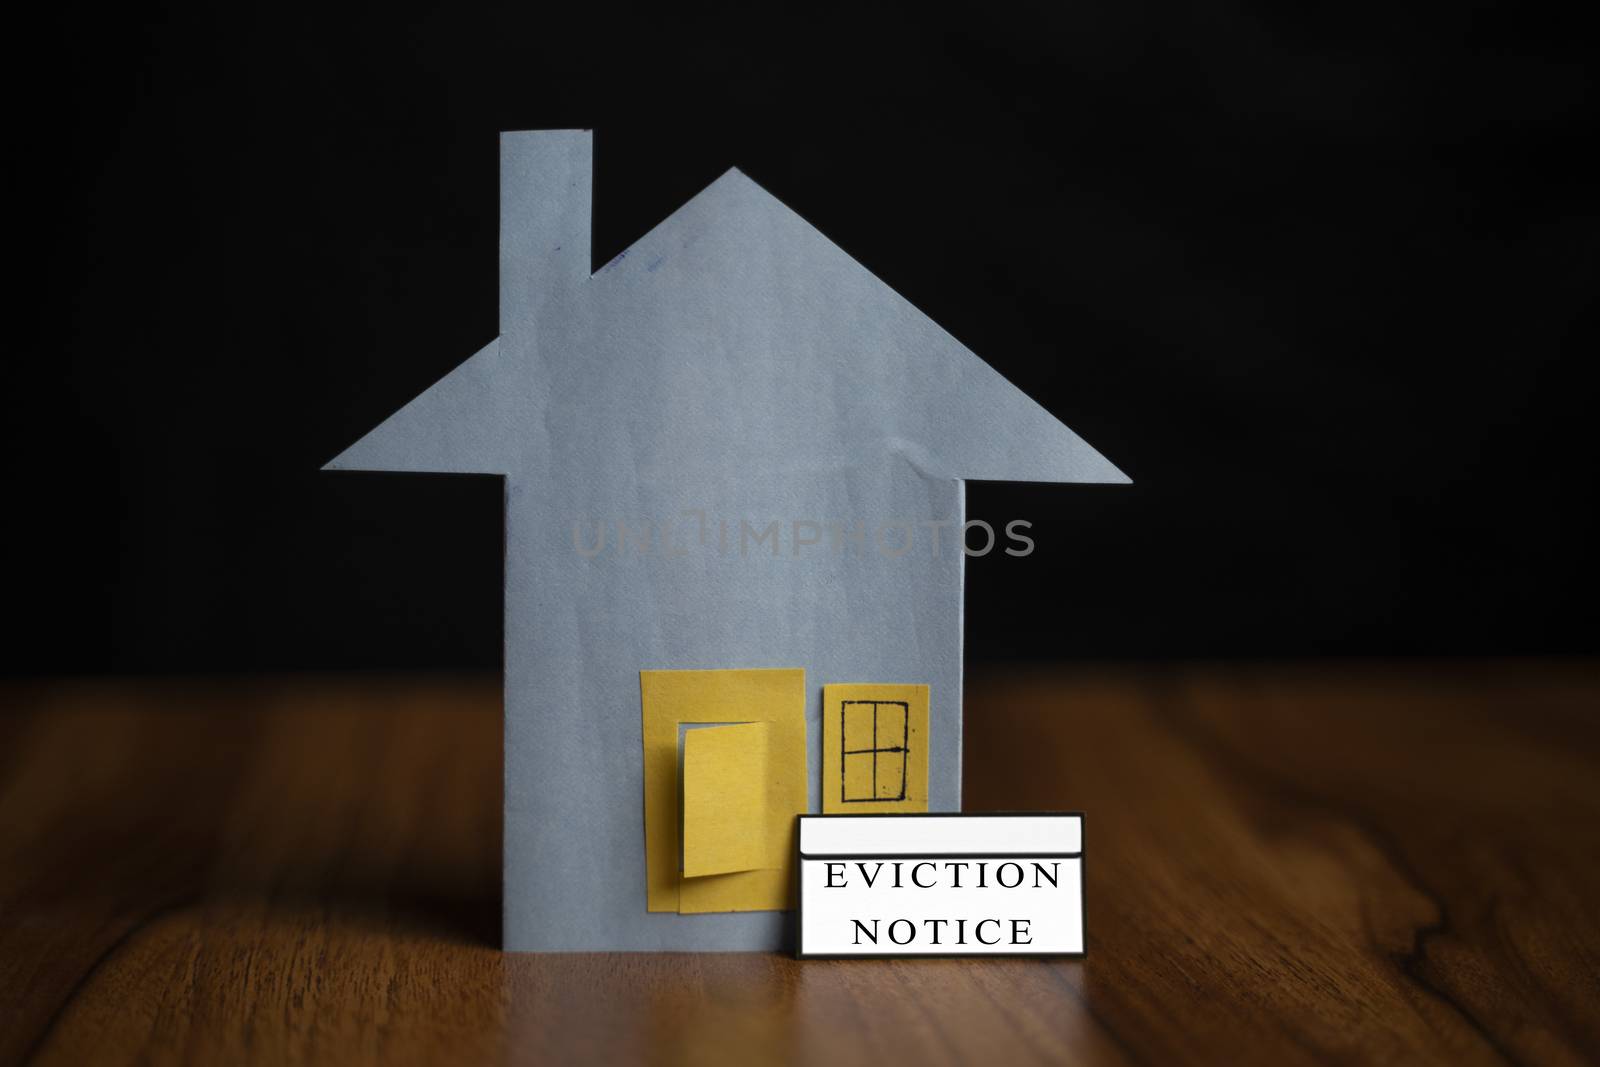 eviction notice sticker infront of door - concept showing of tenant foreclosure or rent pending on black background